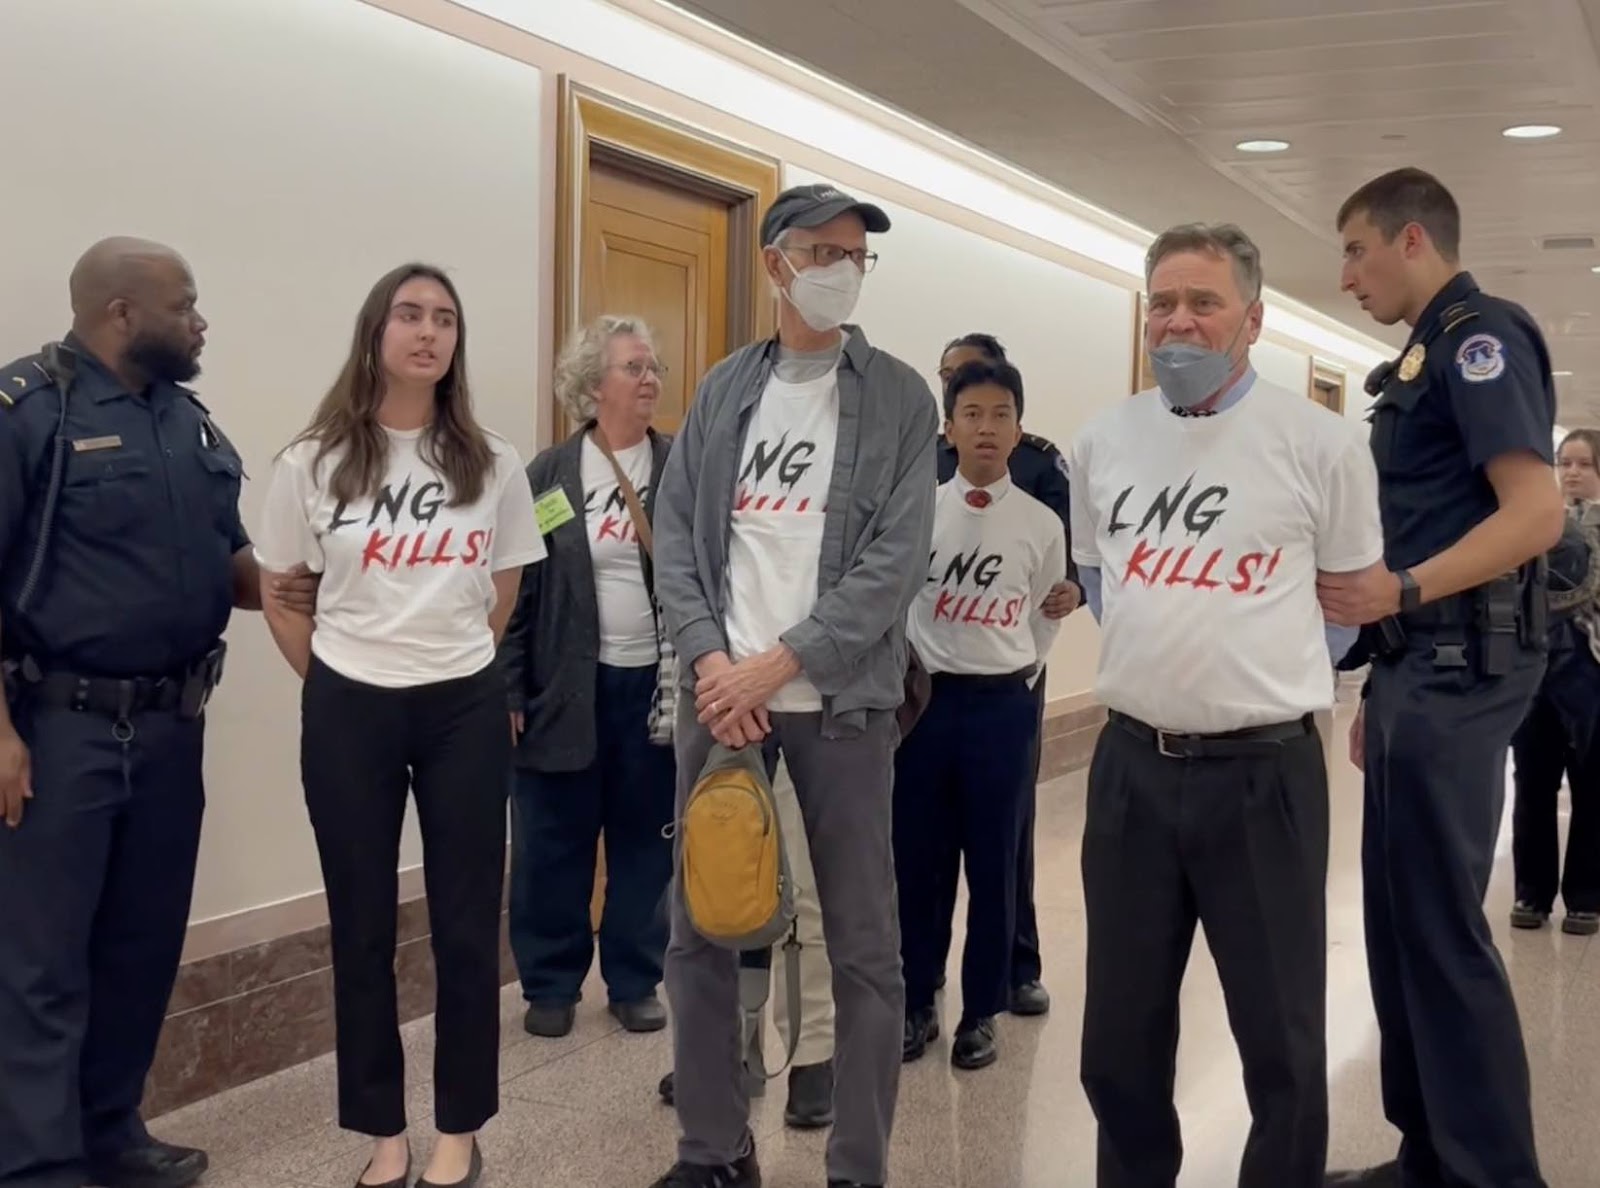 A group of activists wearing shirts that say 'LNG Kills!' are handcuffed by police